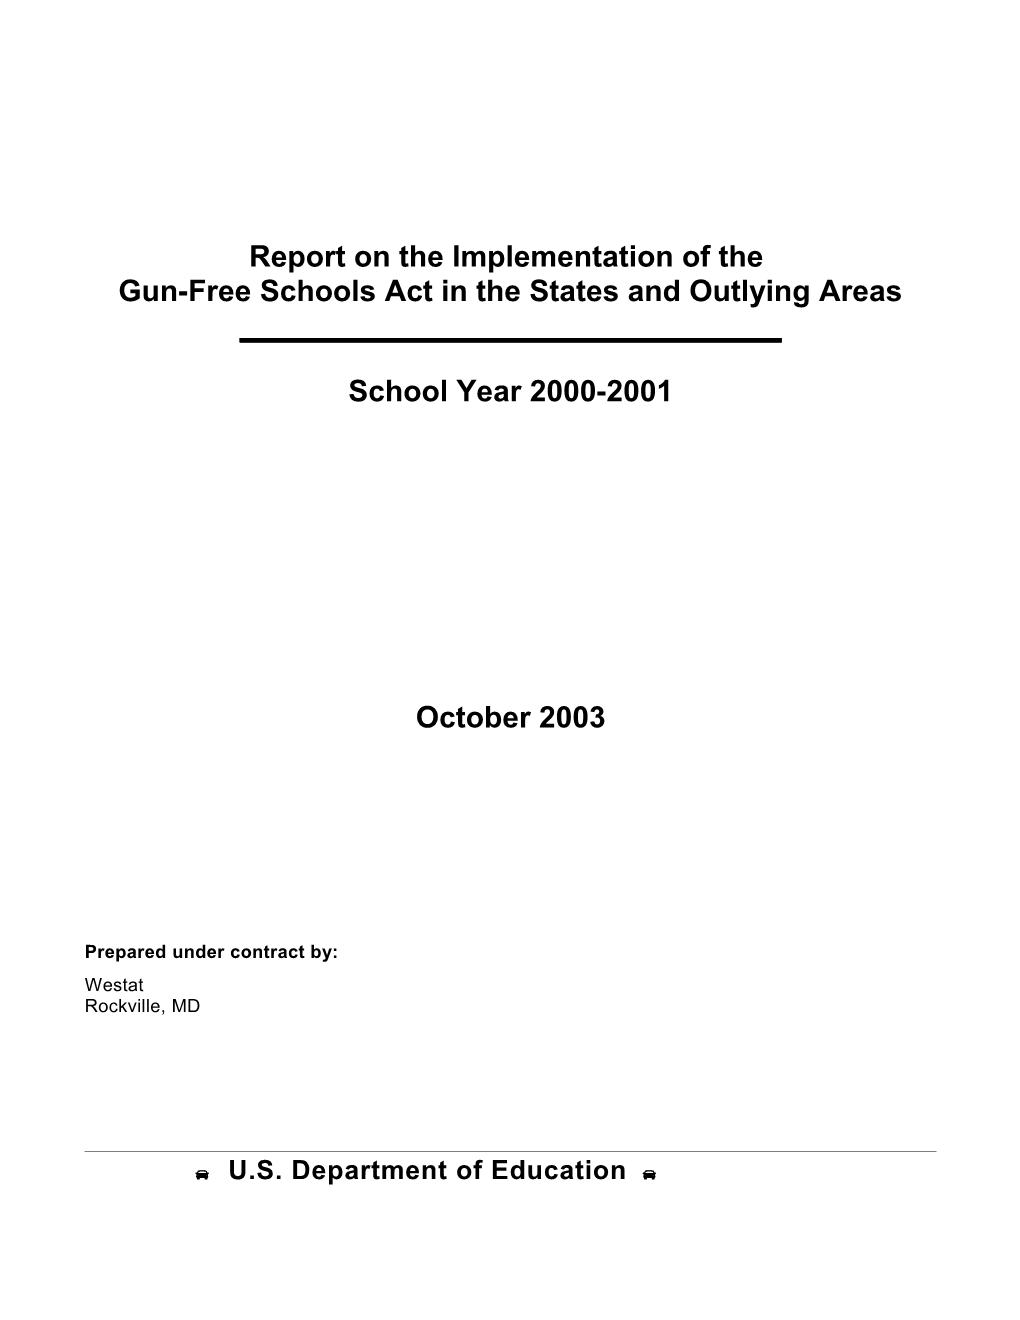 Report on State/Territory Implementation of the Gun-Free Schools Act, School Year 2000-2001